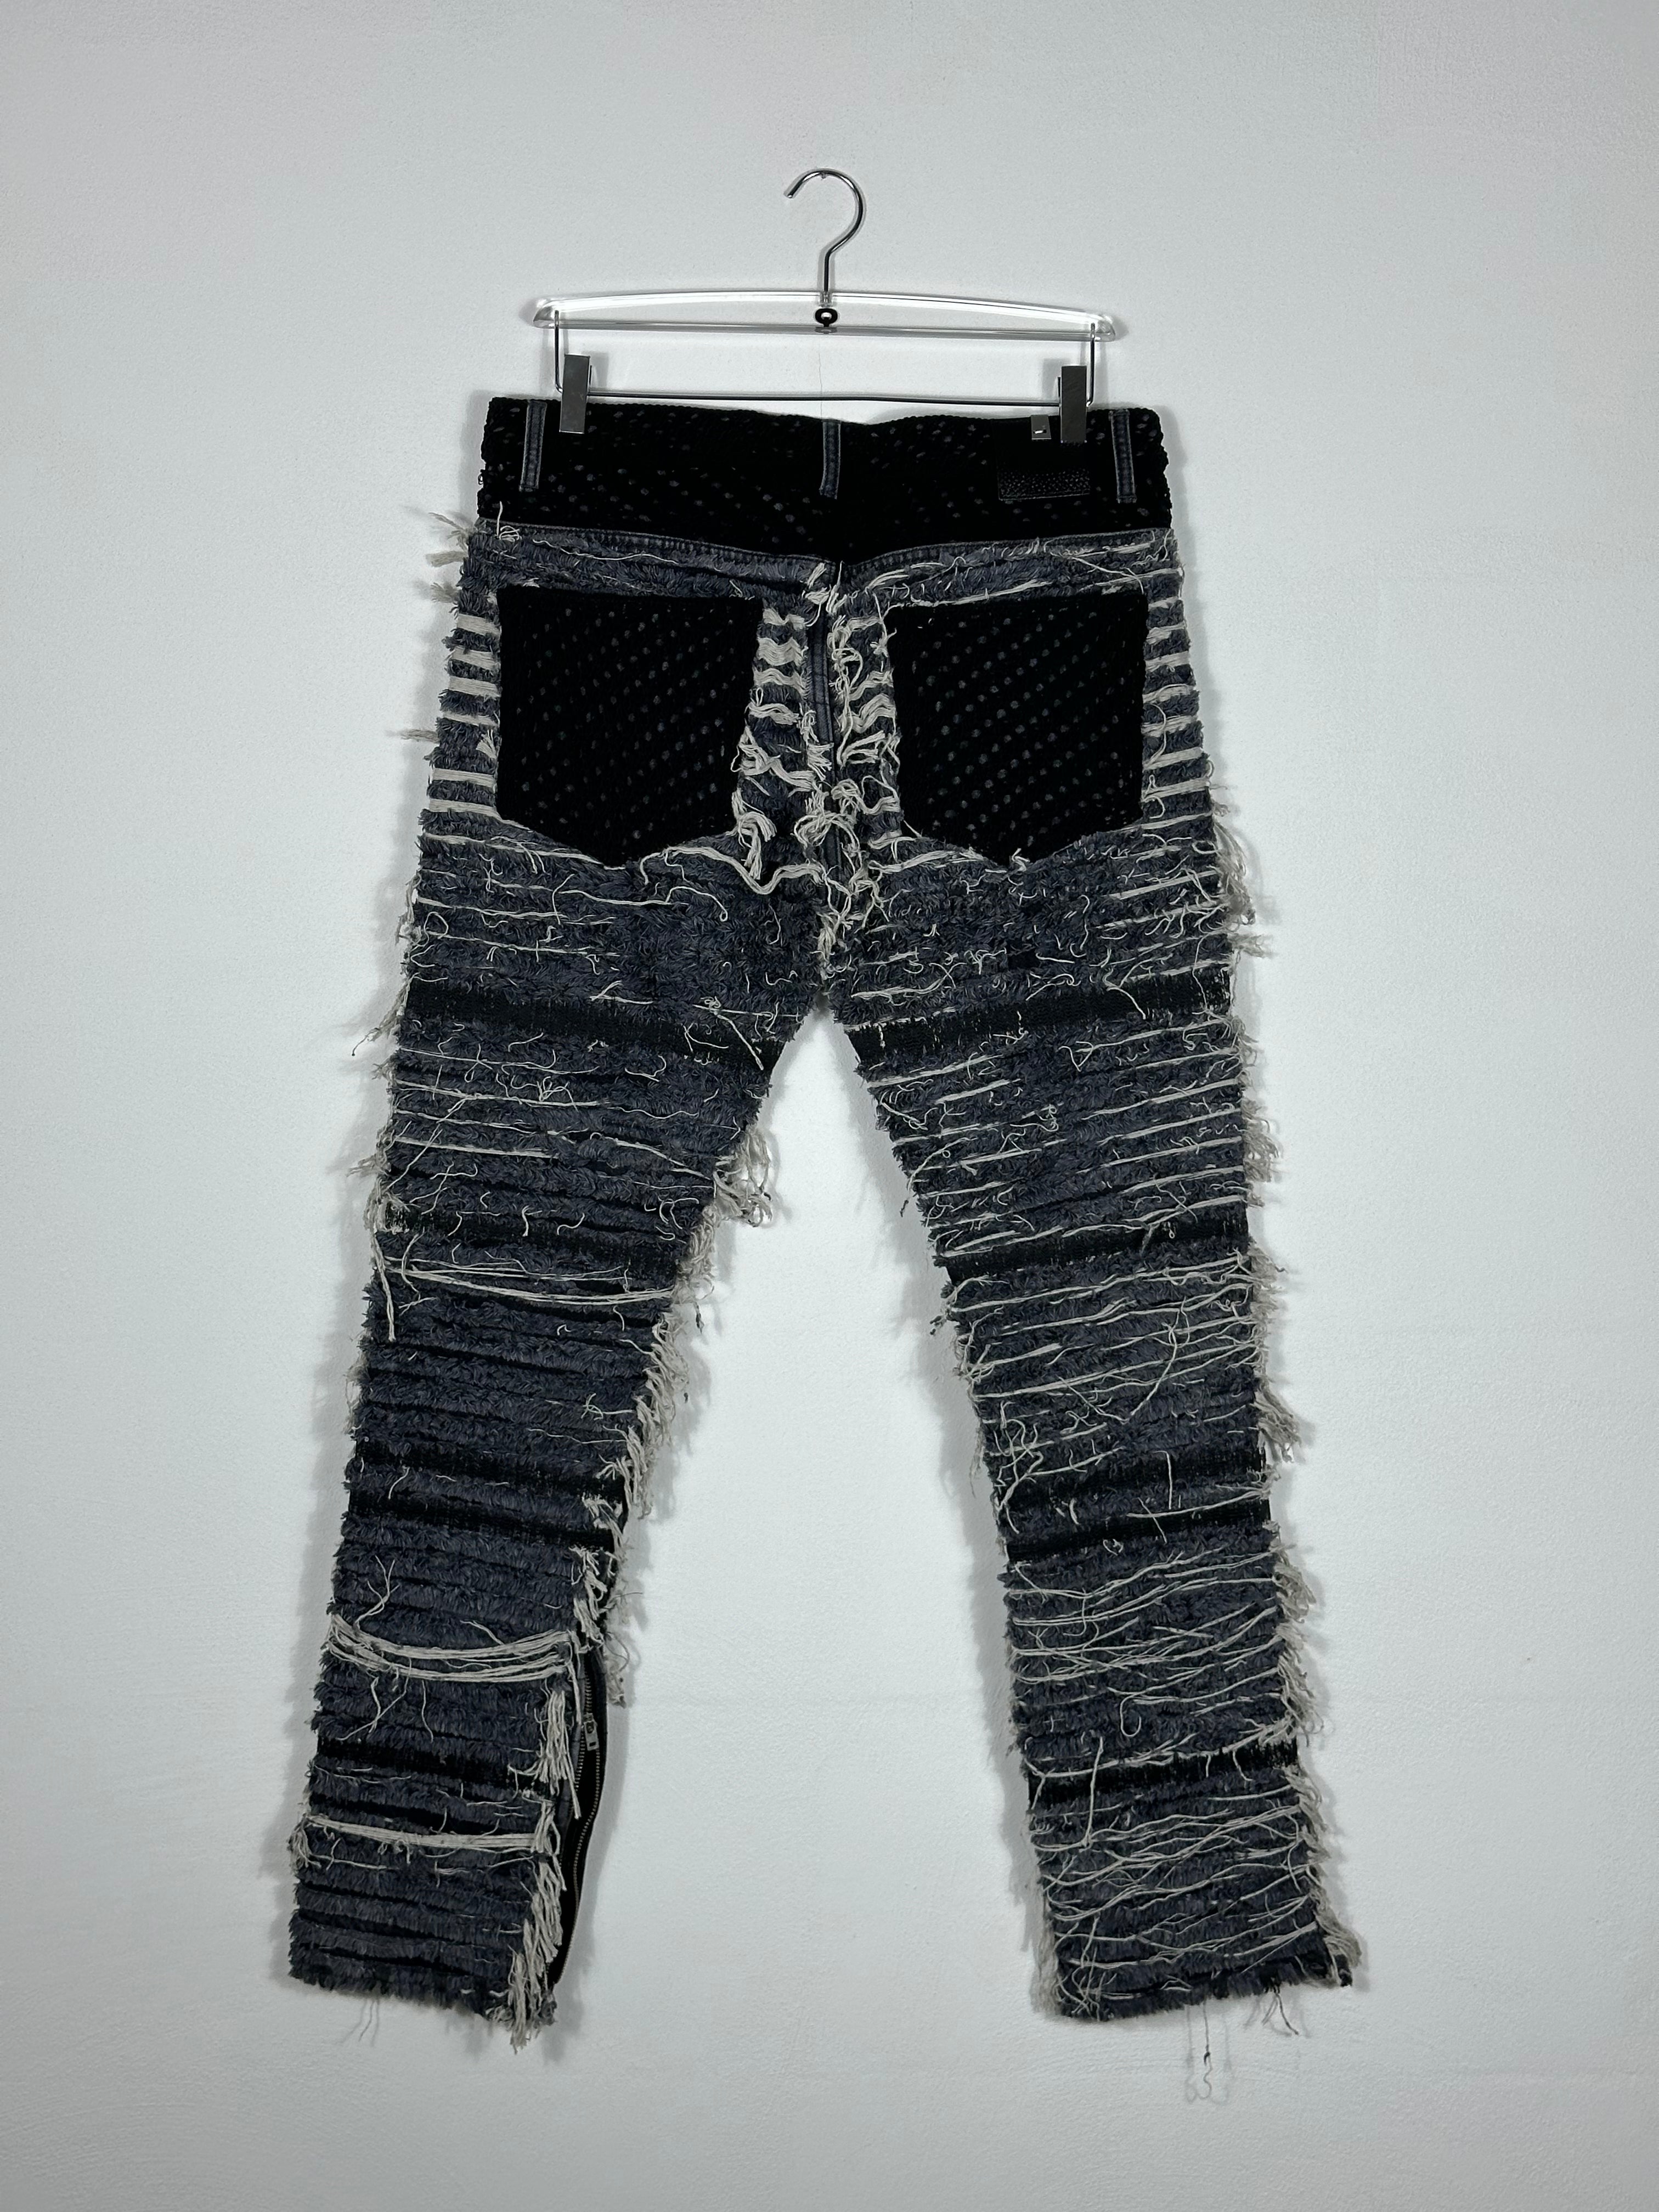 All-over Frayed Jeans by Sfera Ebbasta